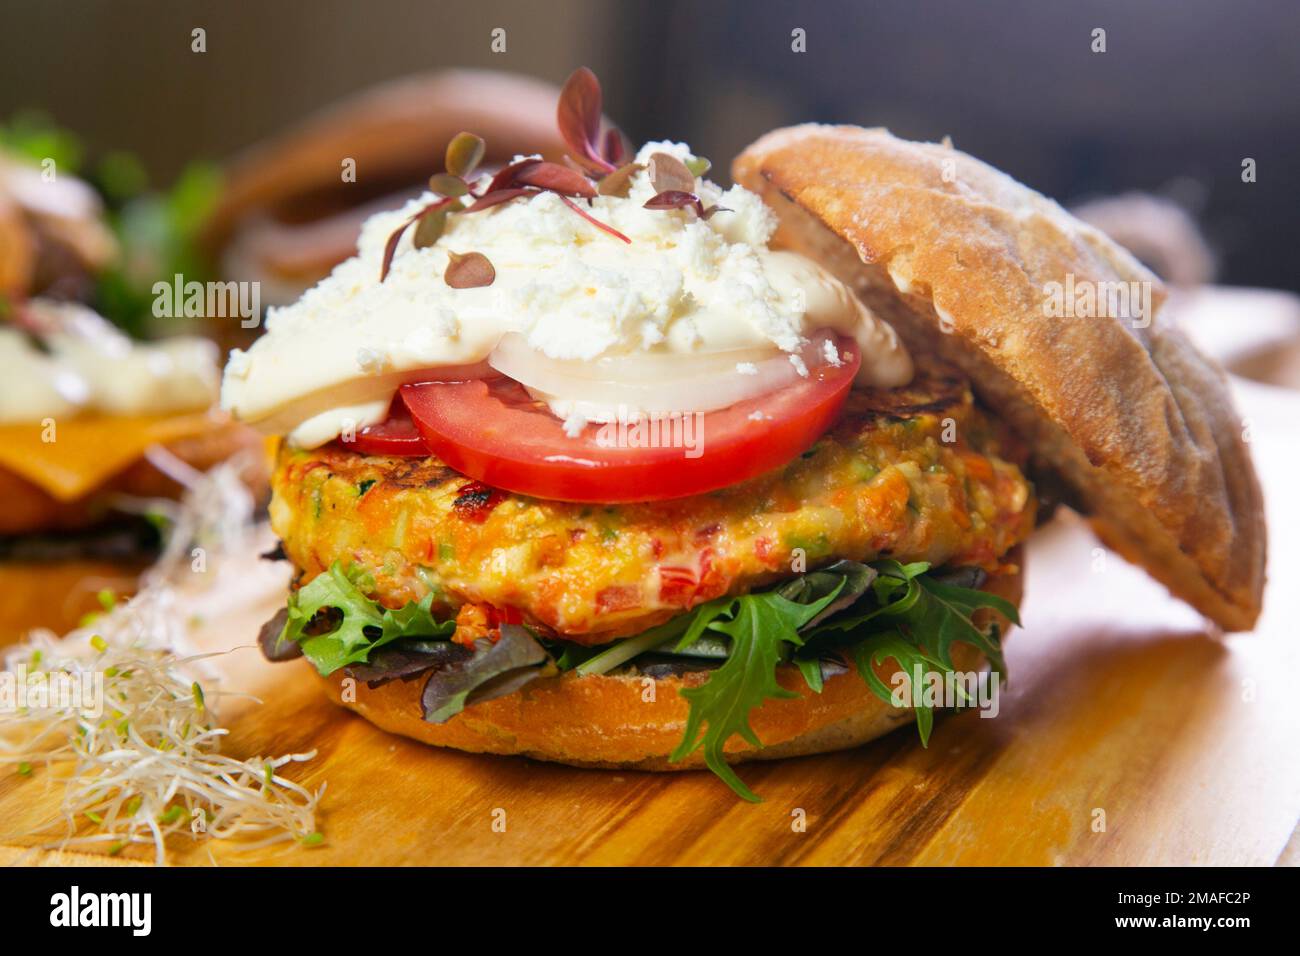 Vegetarian burger made with a mixture of vegetables and products such as tofu or seitan. Stock Photo